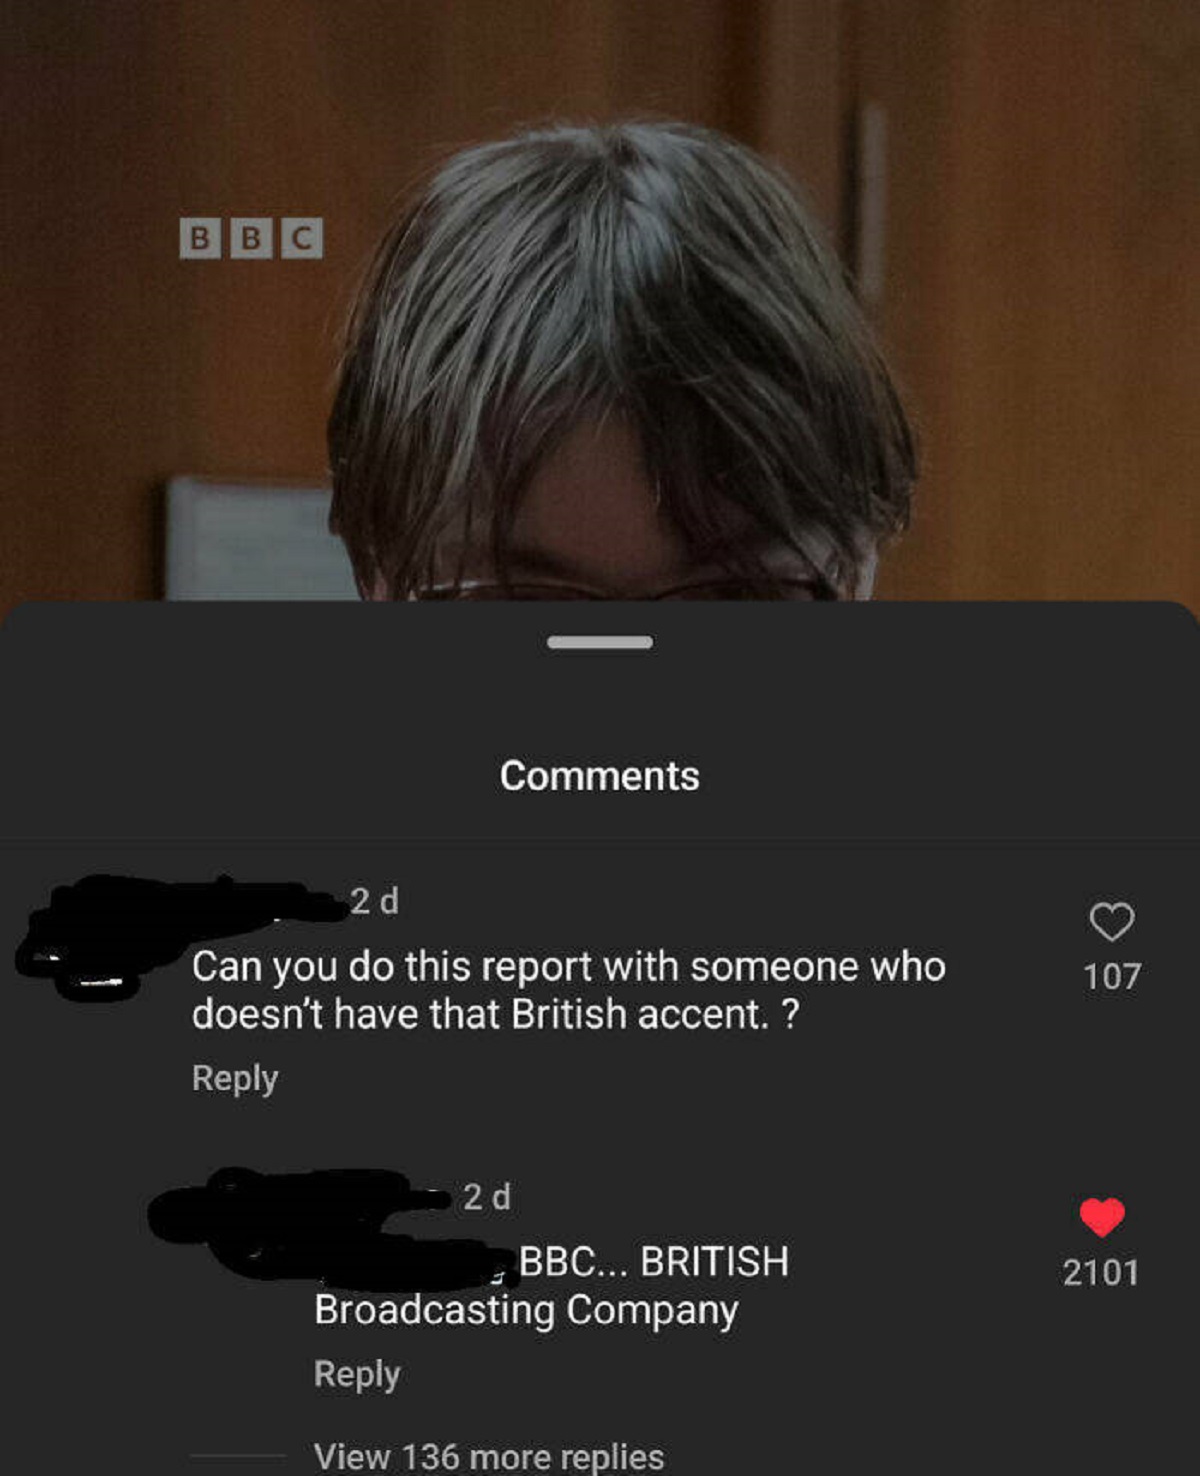 screenshot - Bbc 2d Can you do this report with someone who doesn't have that British accent. ? 107 2 d Bbc... British 2101 Broadcasting Company View 136 more replies